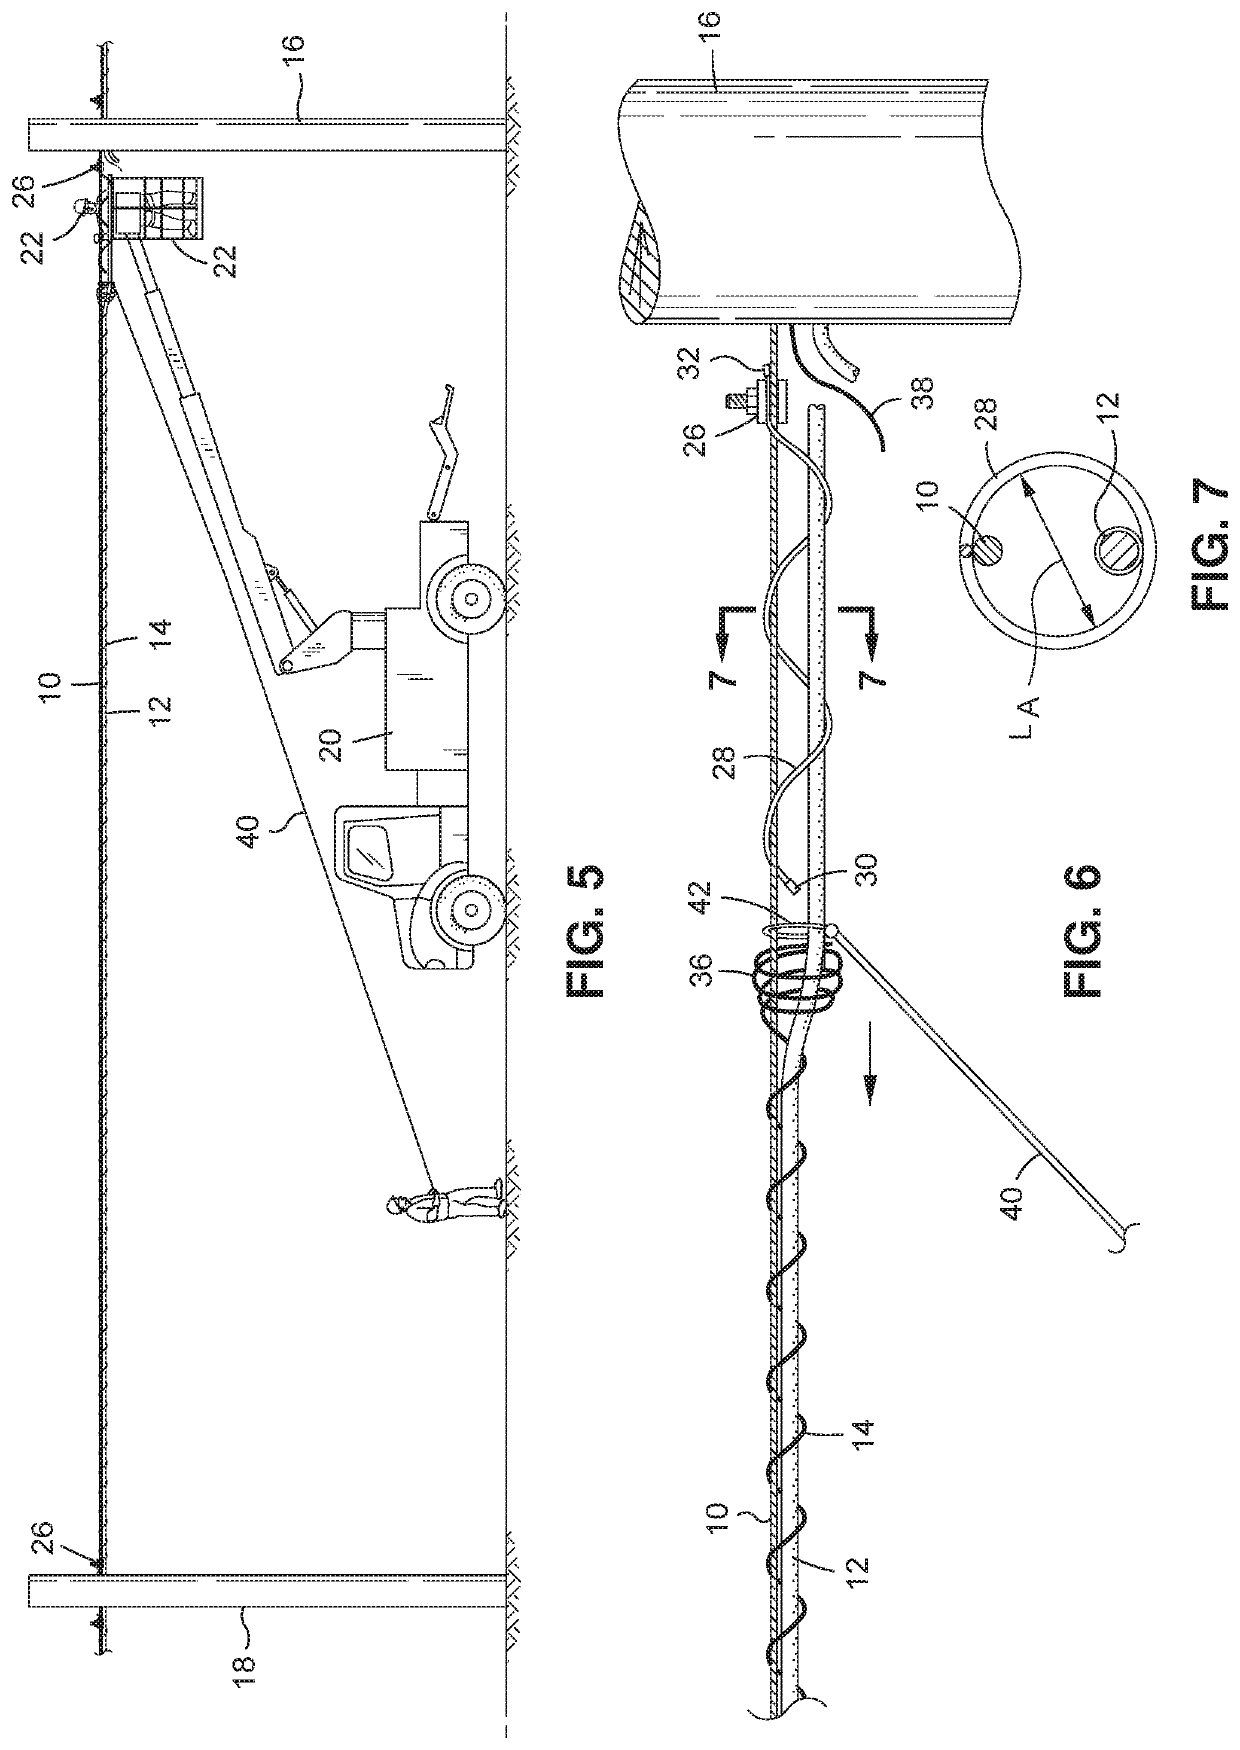 Method of installing spiral hangers about a messenger line while removing lashing wire